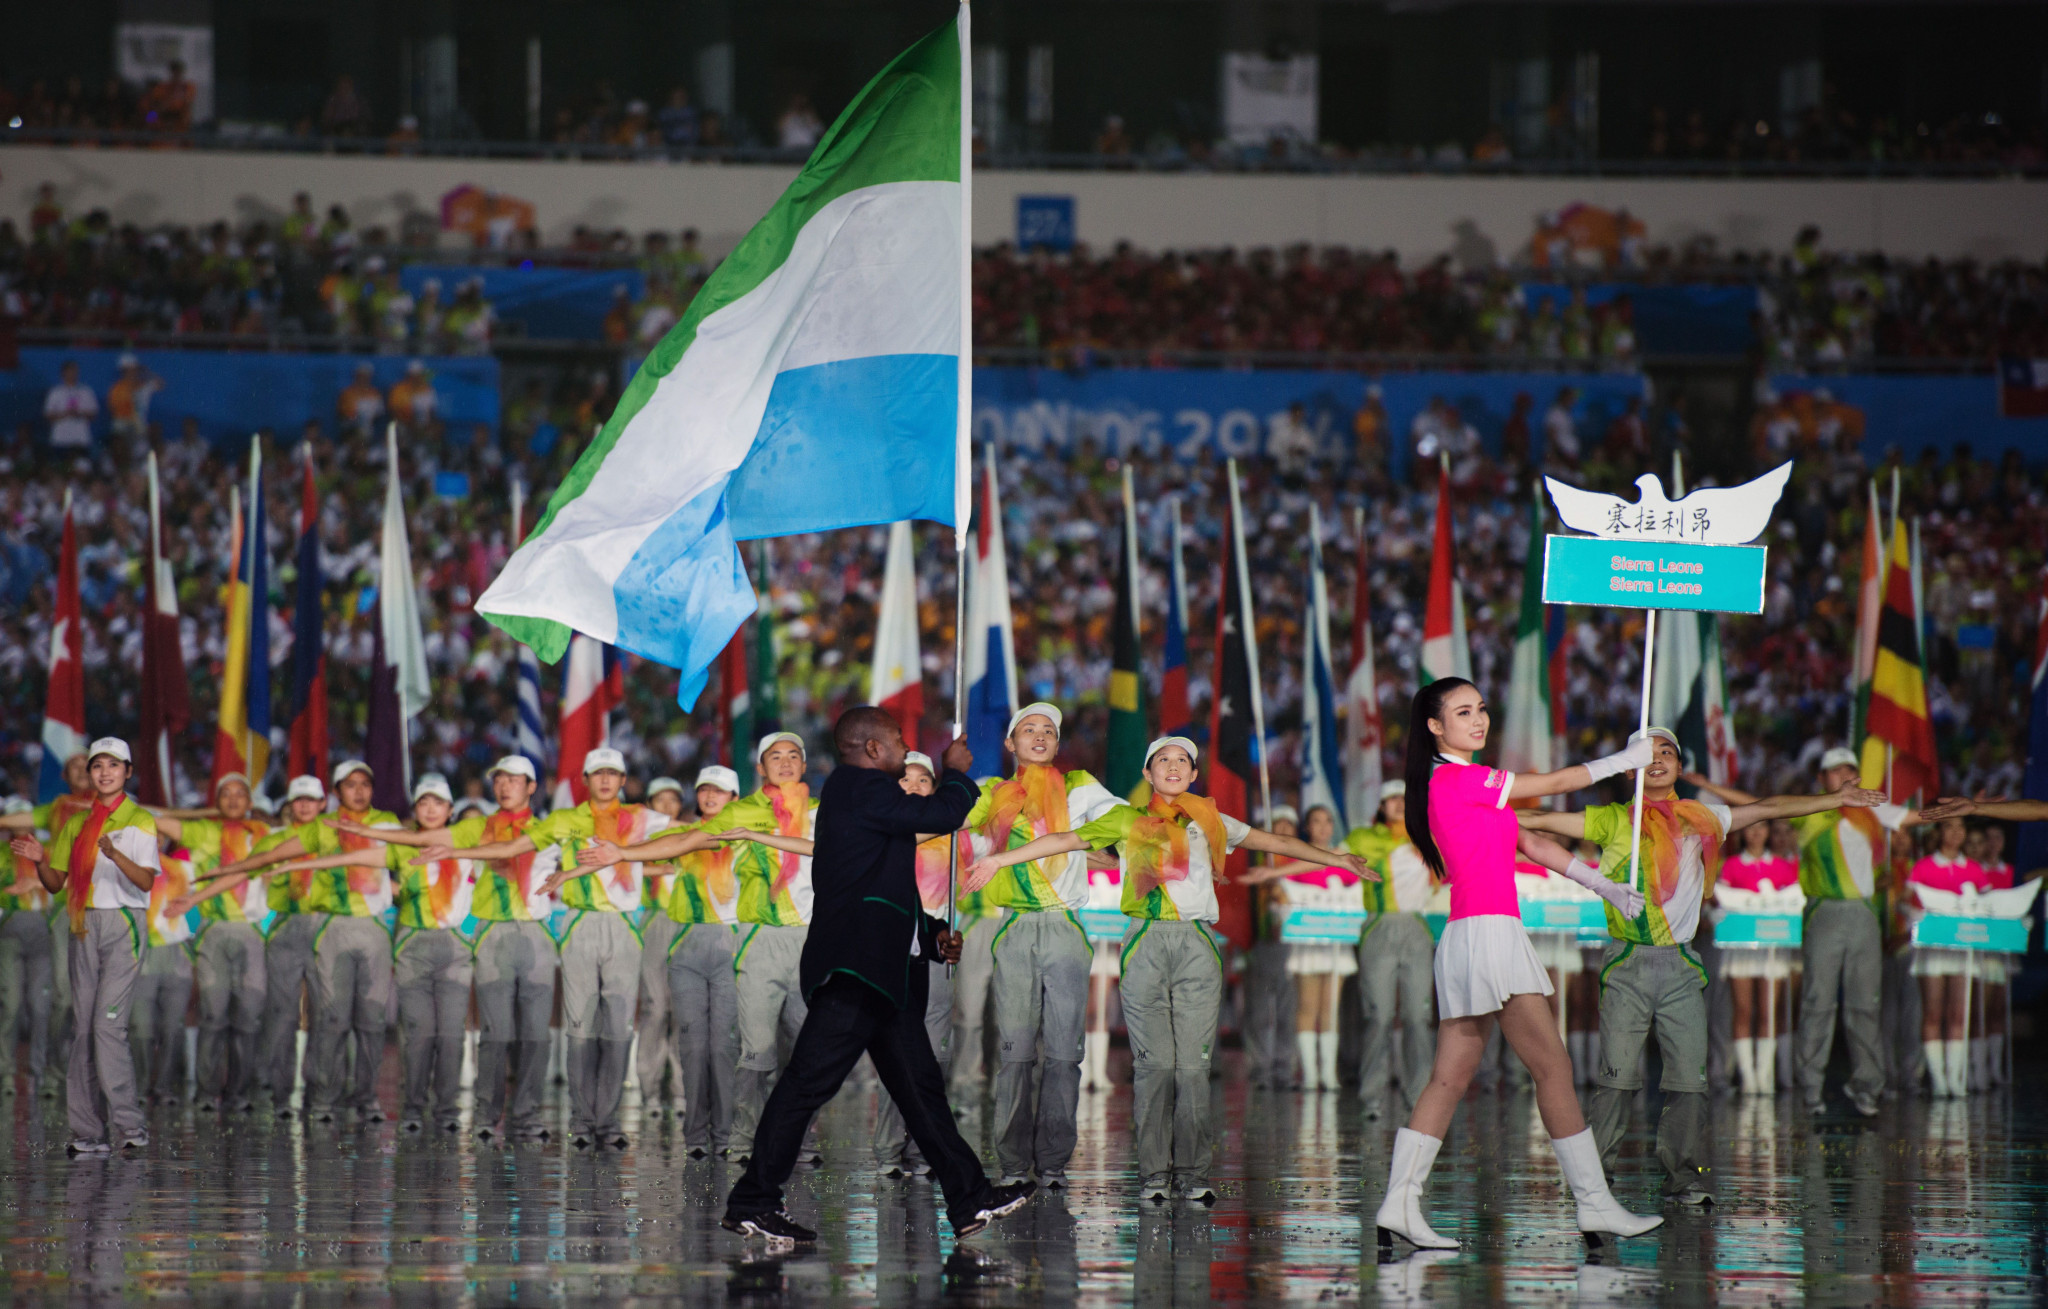 Unisa Deen Kargbo carried the Sierra Leone flag alone at the Nanjing 2014 Summer Youth Olympic Games, after the country was banned due to Ebola ©Getty Images